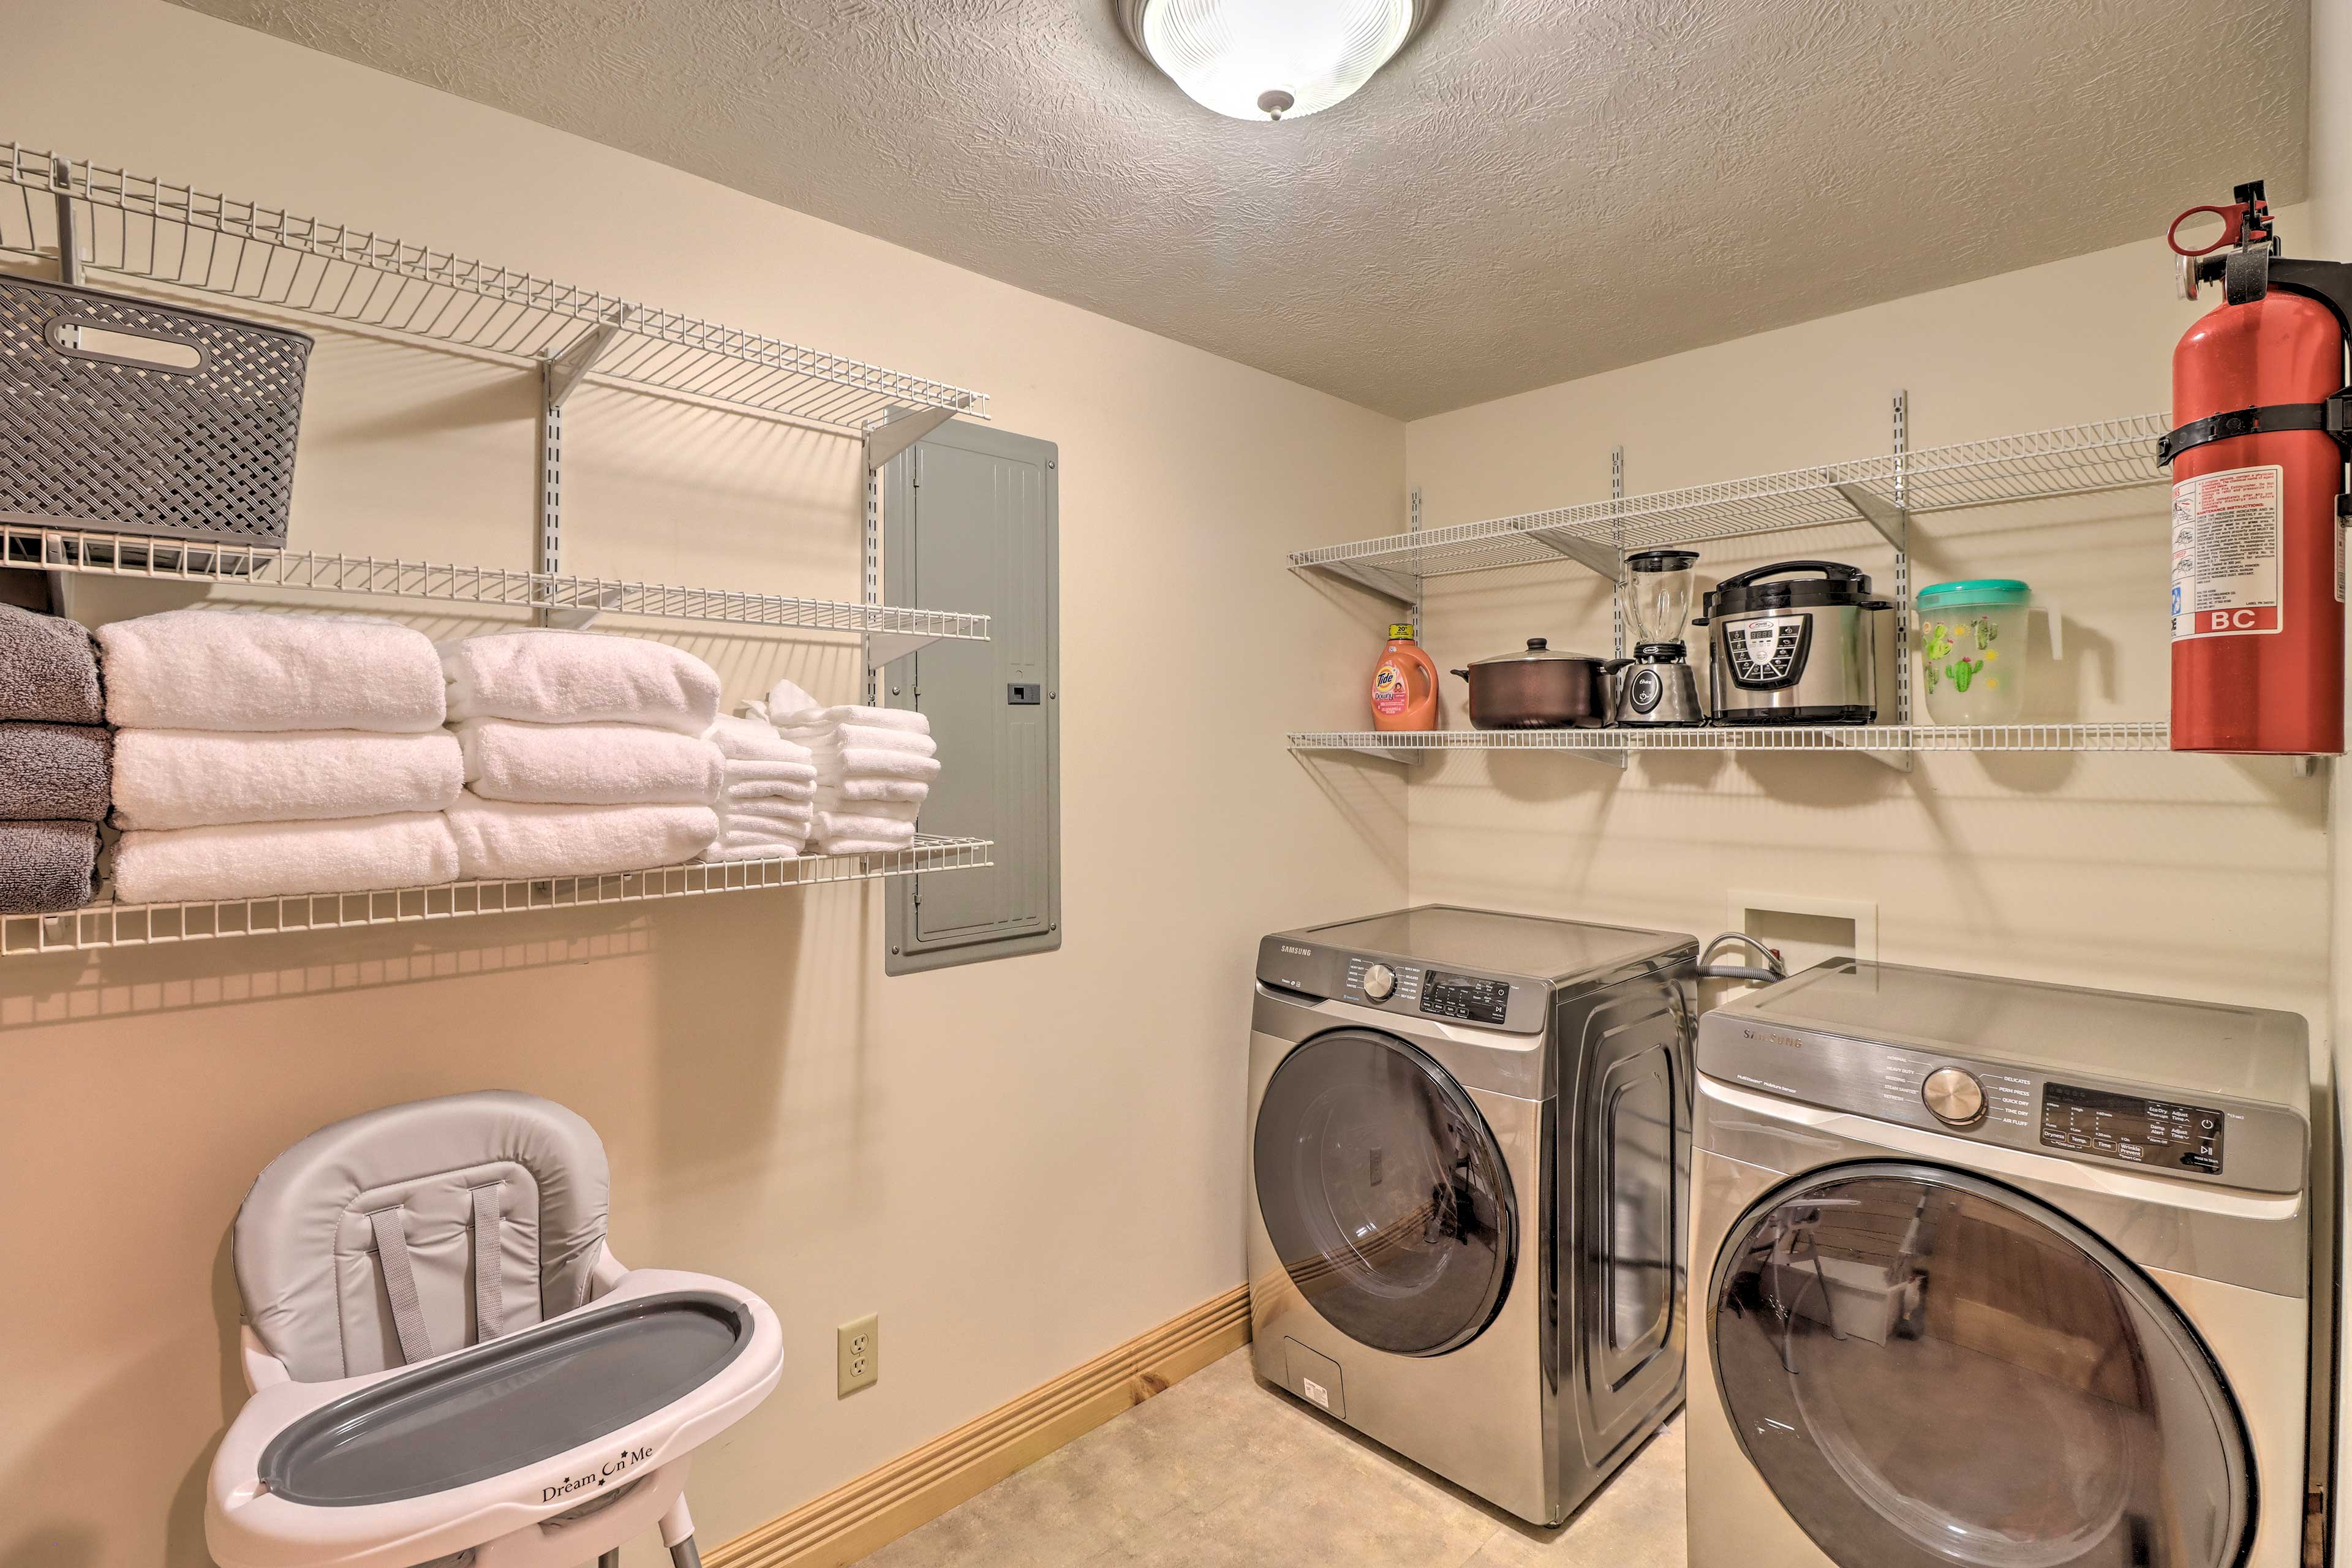 Laundry Area | Washer/Dryer | Clothes Steamer | Laundry Detergent | Iron/Board